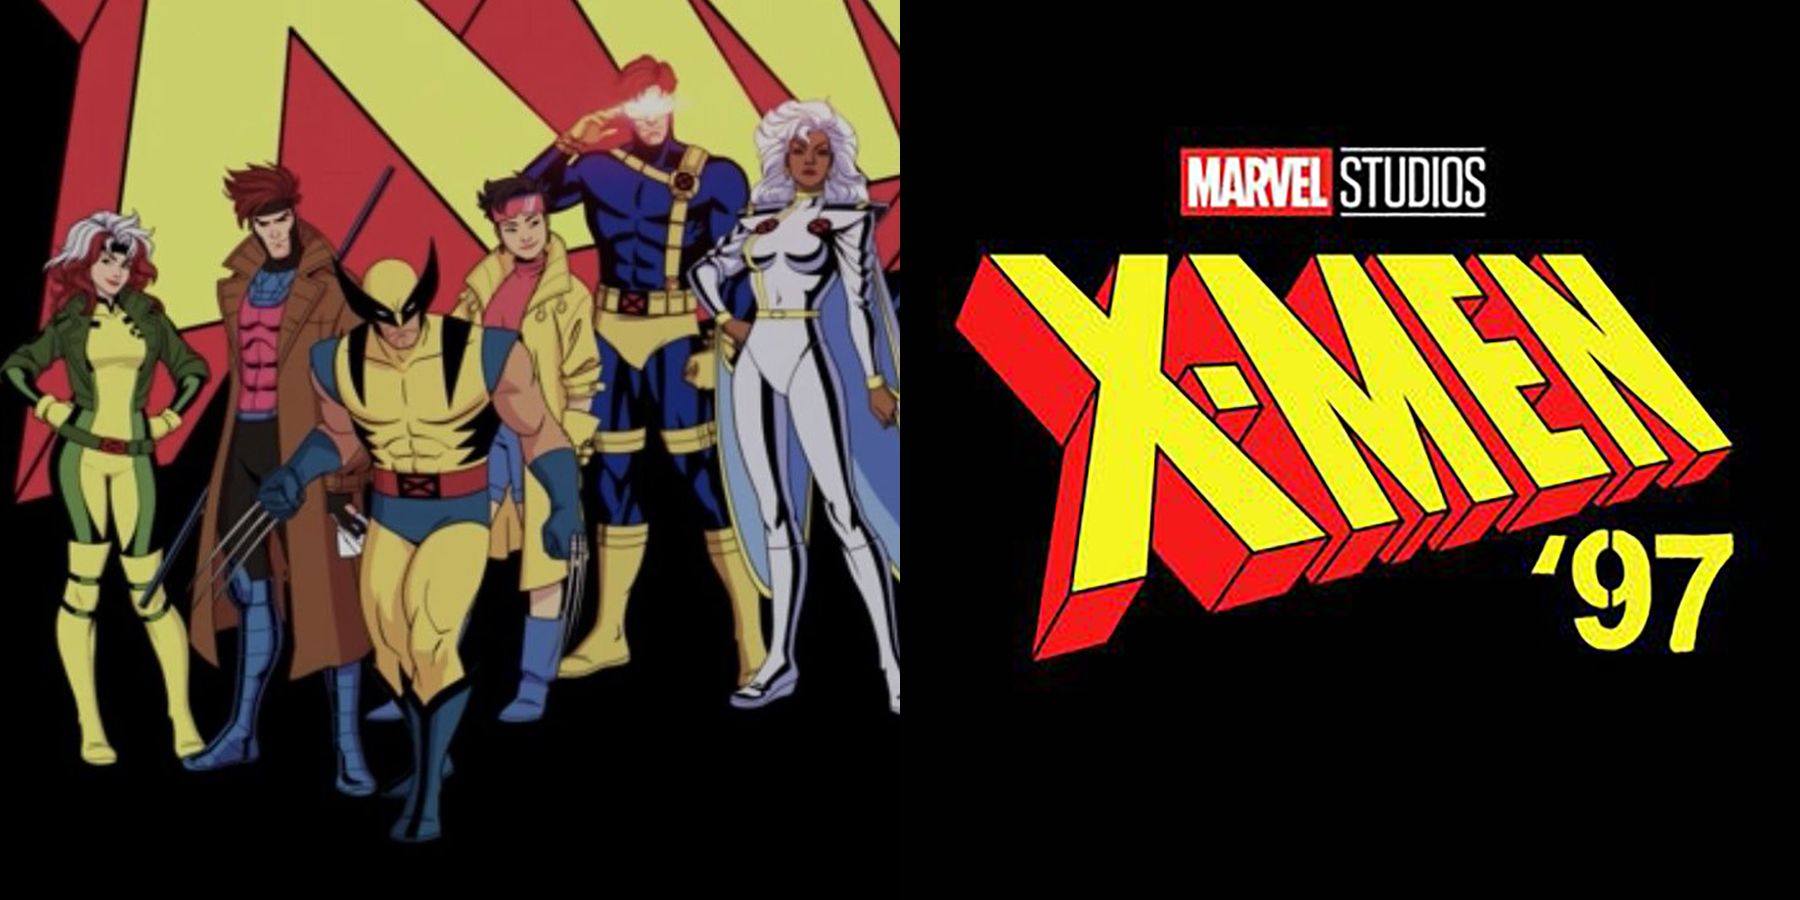 X-Men '97 Producers Reveal Details About The Marvel Studios Series